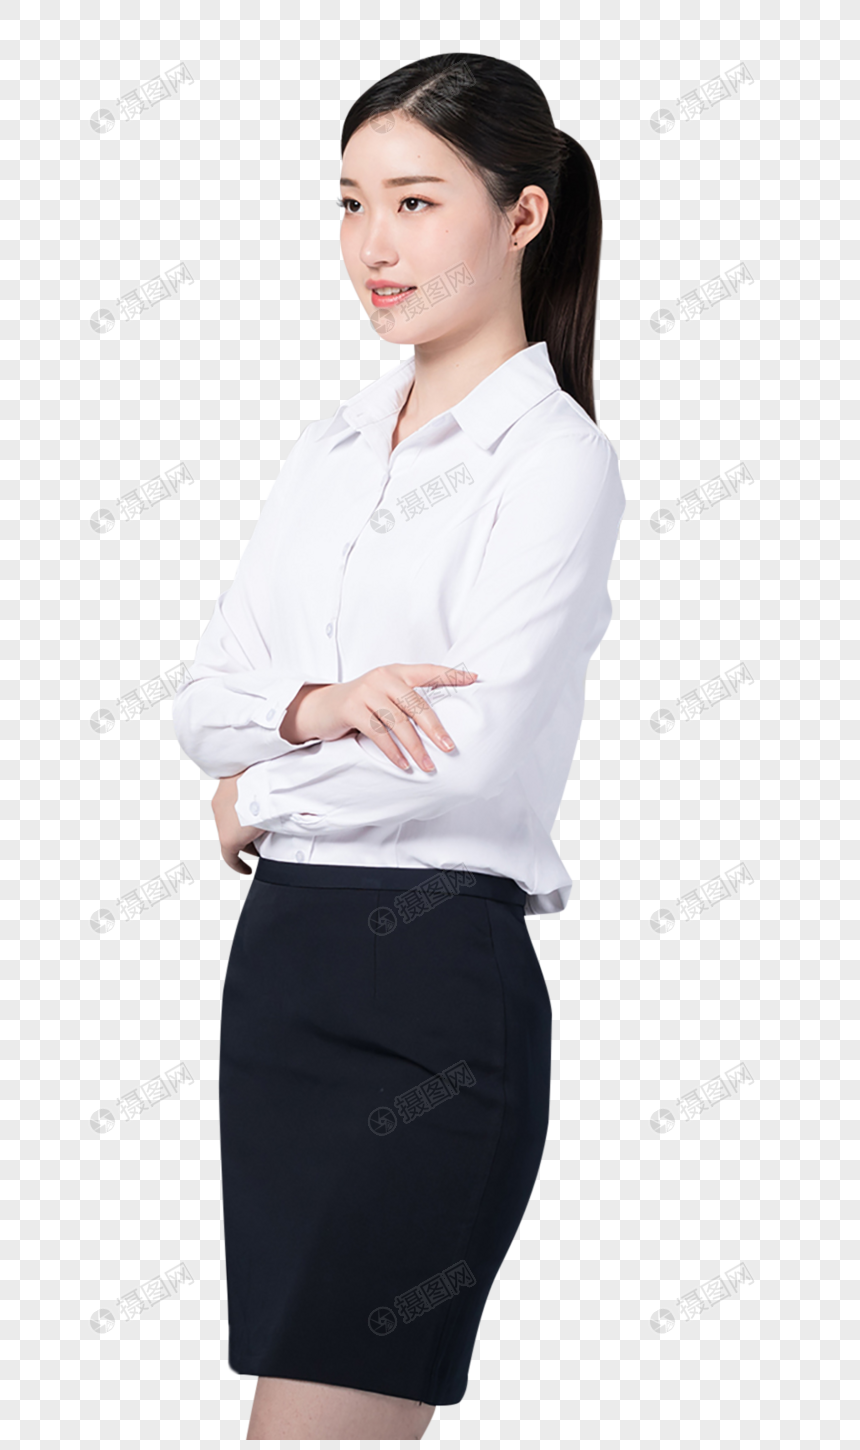 confident workplace women wear professional attire png image picture free download 400279478 lovepik com confident workplace women wear